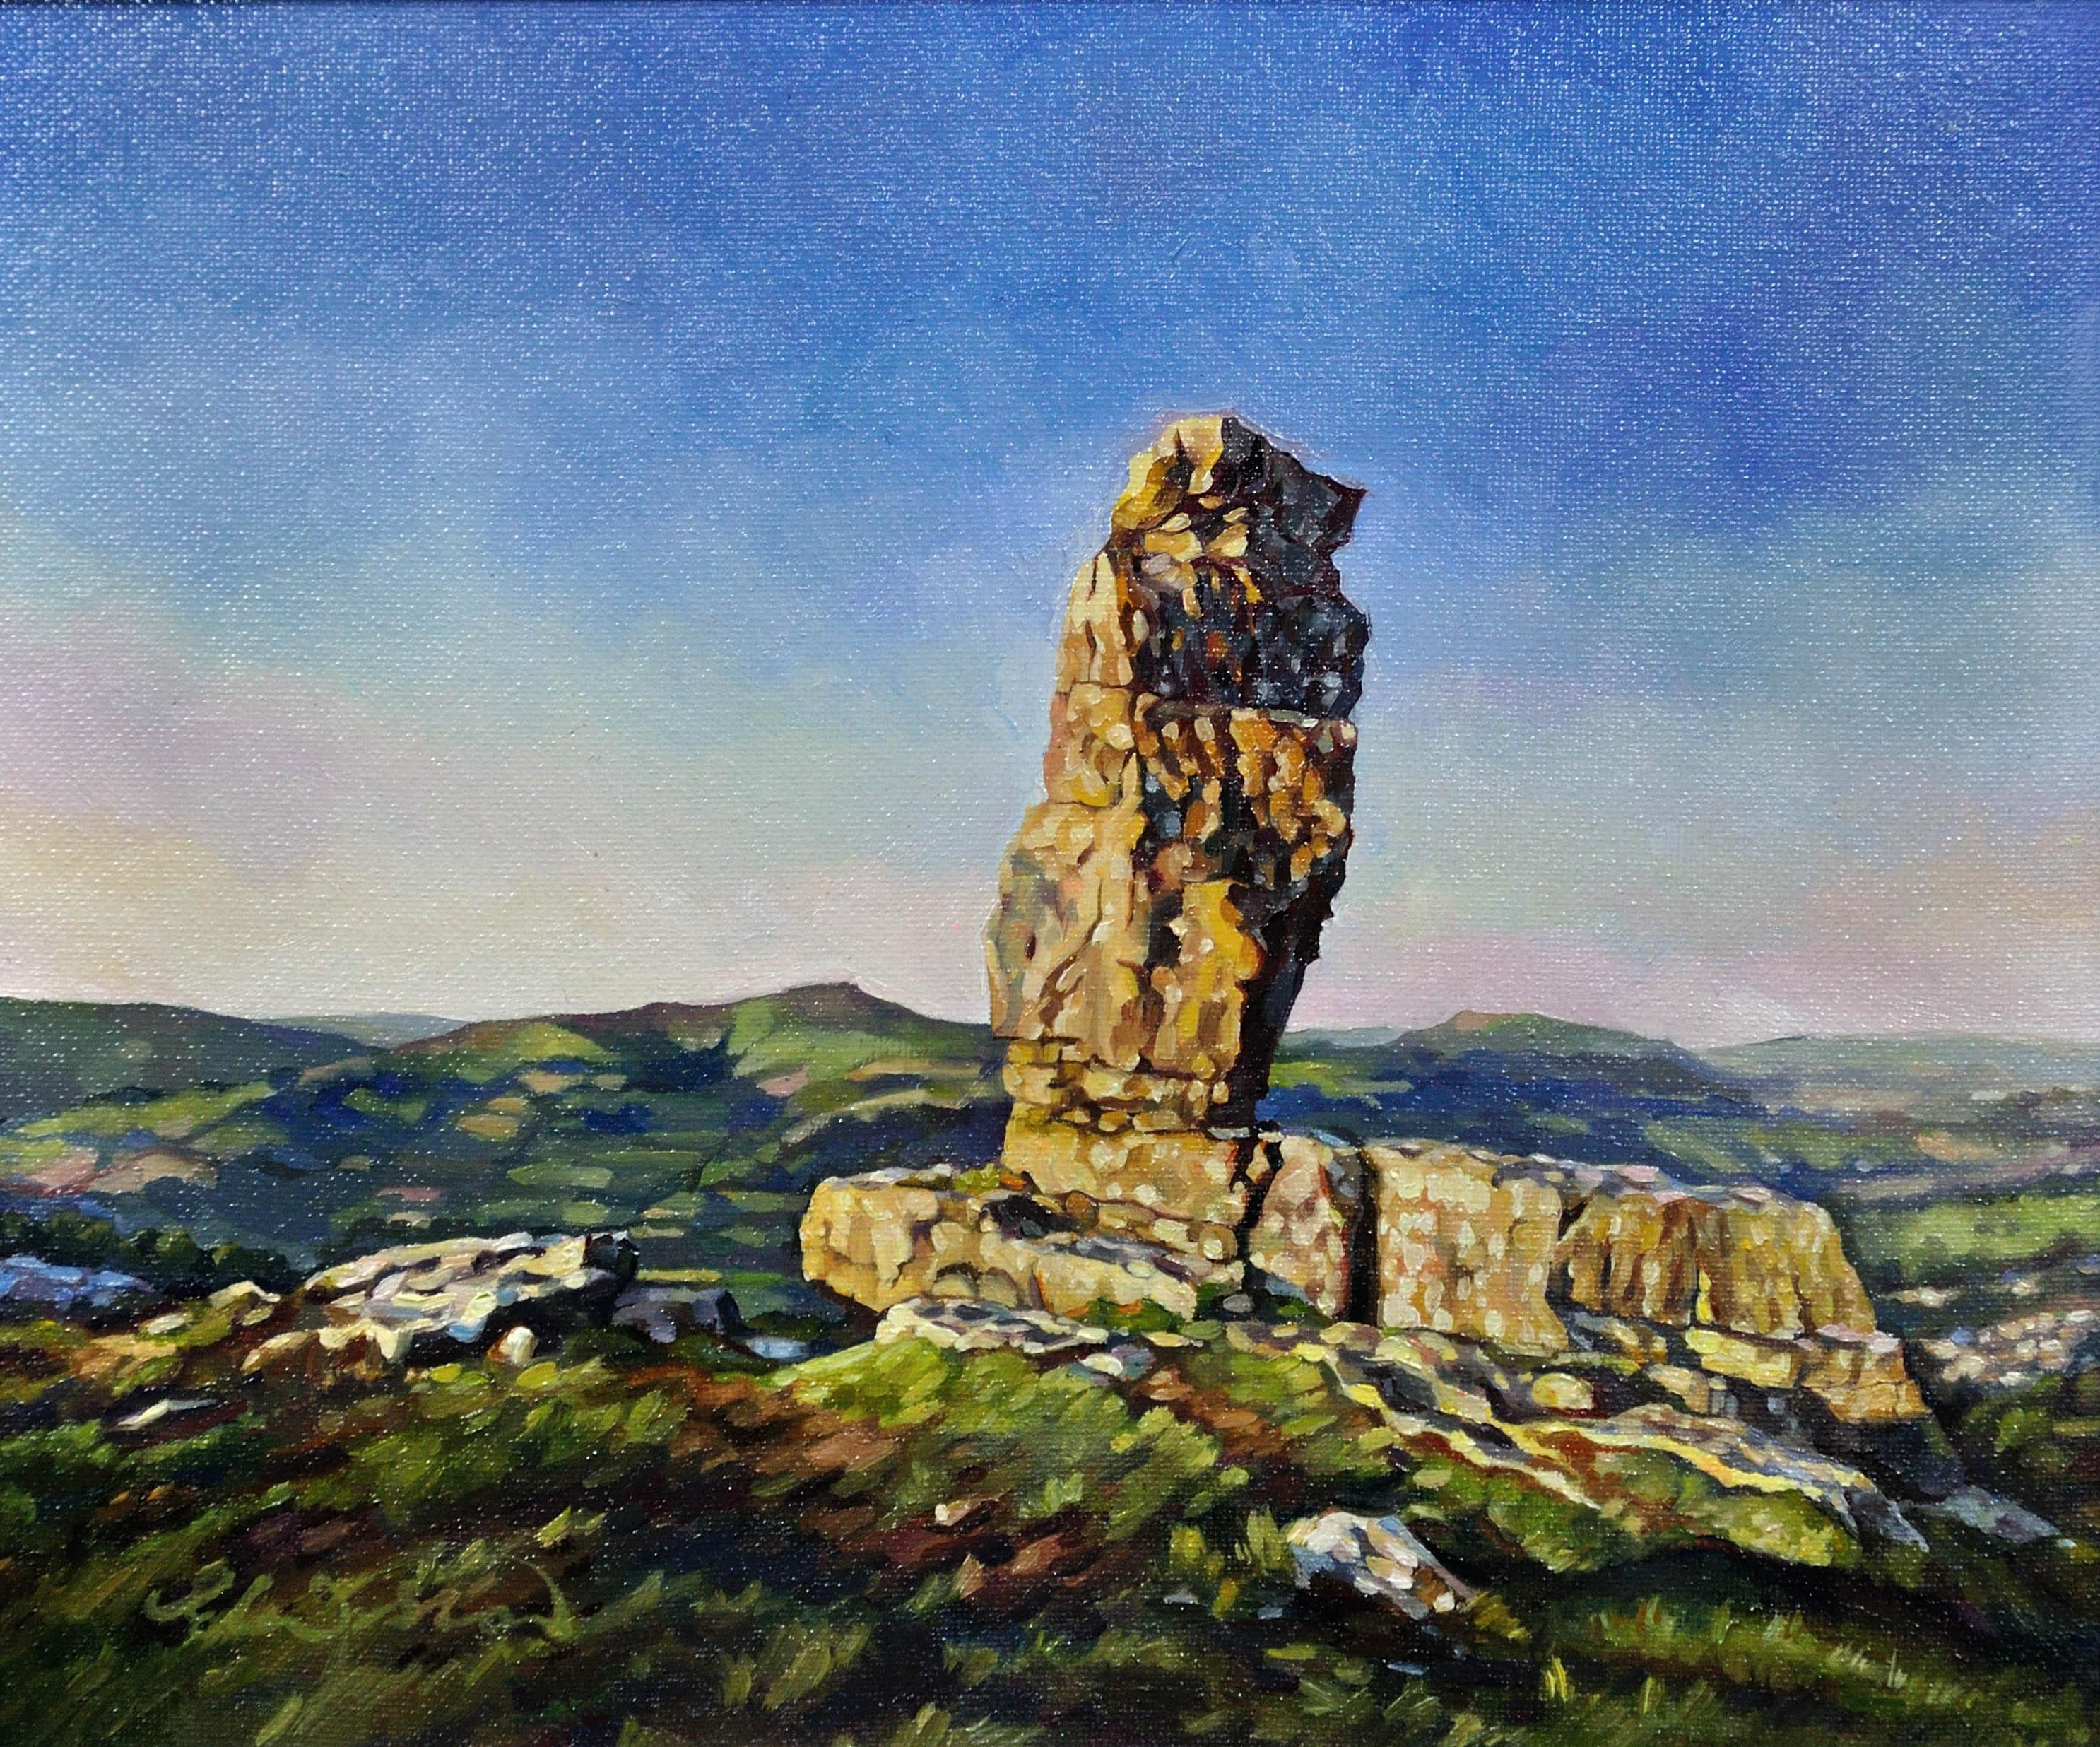 Y Bugail Unig (The Lonely Shepherd), Llangattock, Brecon Beacons. Welsh Folklore - Painting by Elin Sian Blake